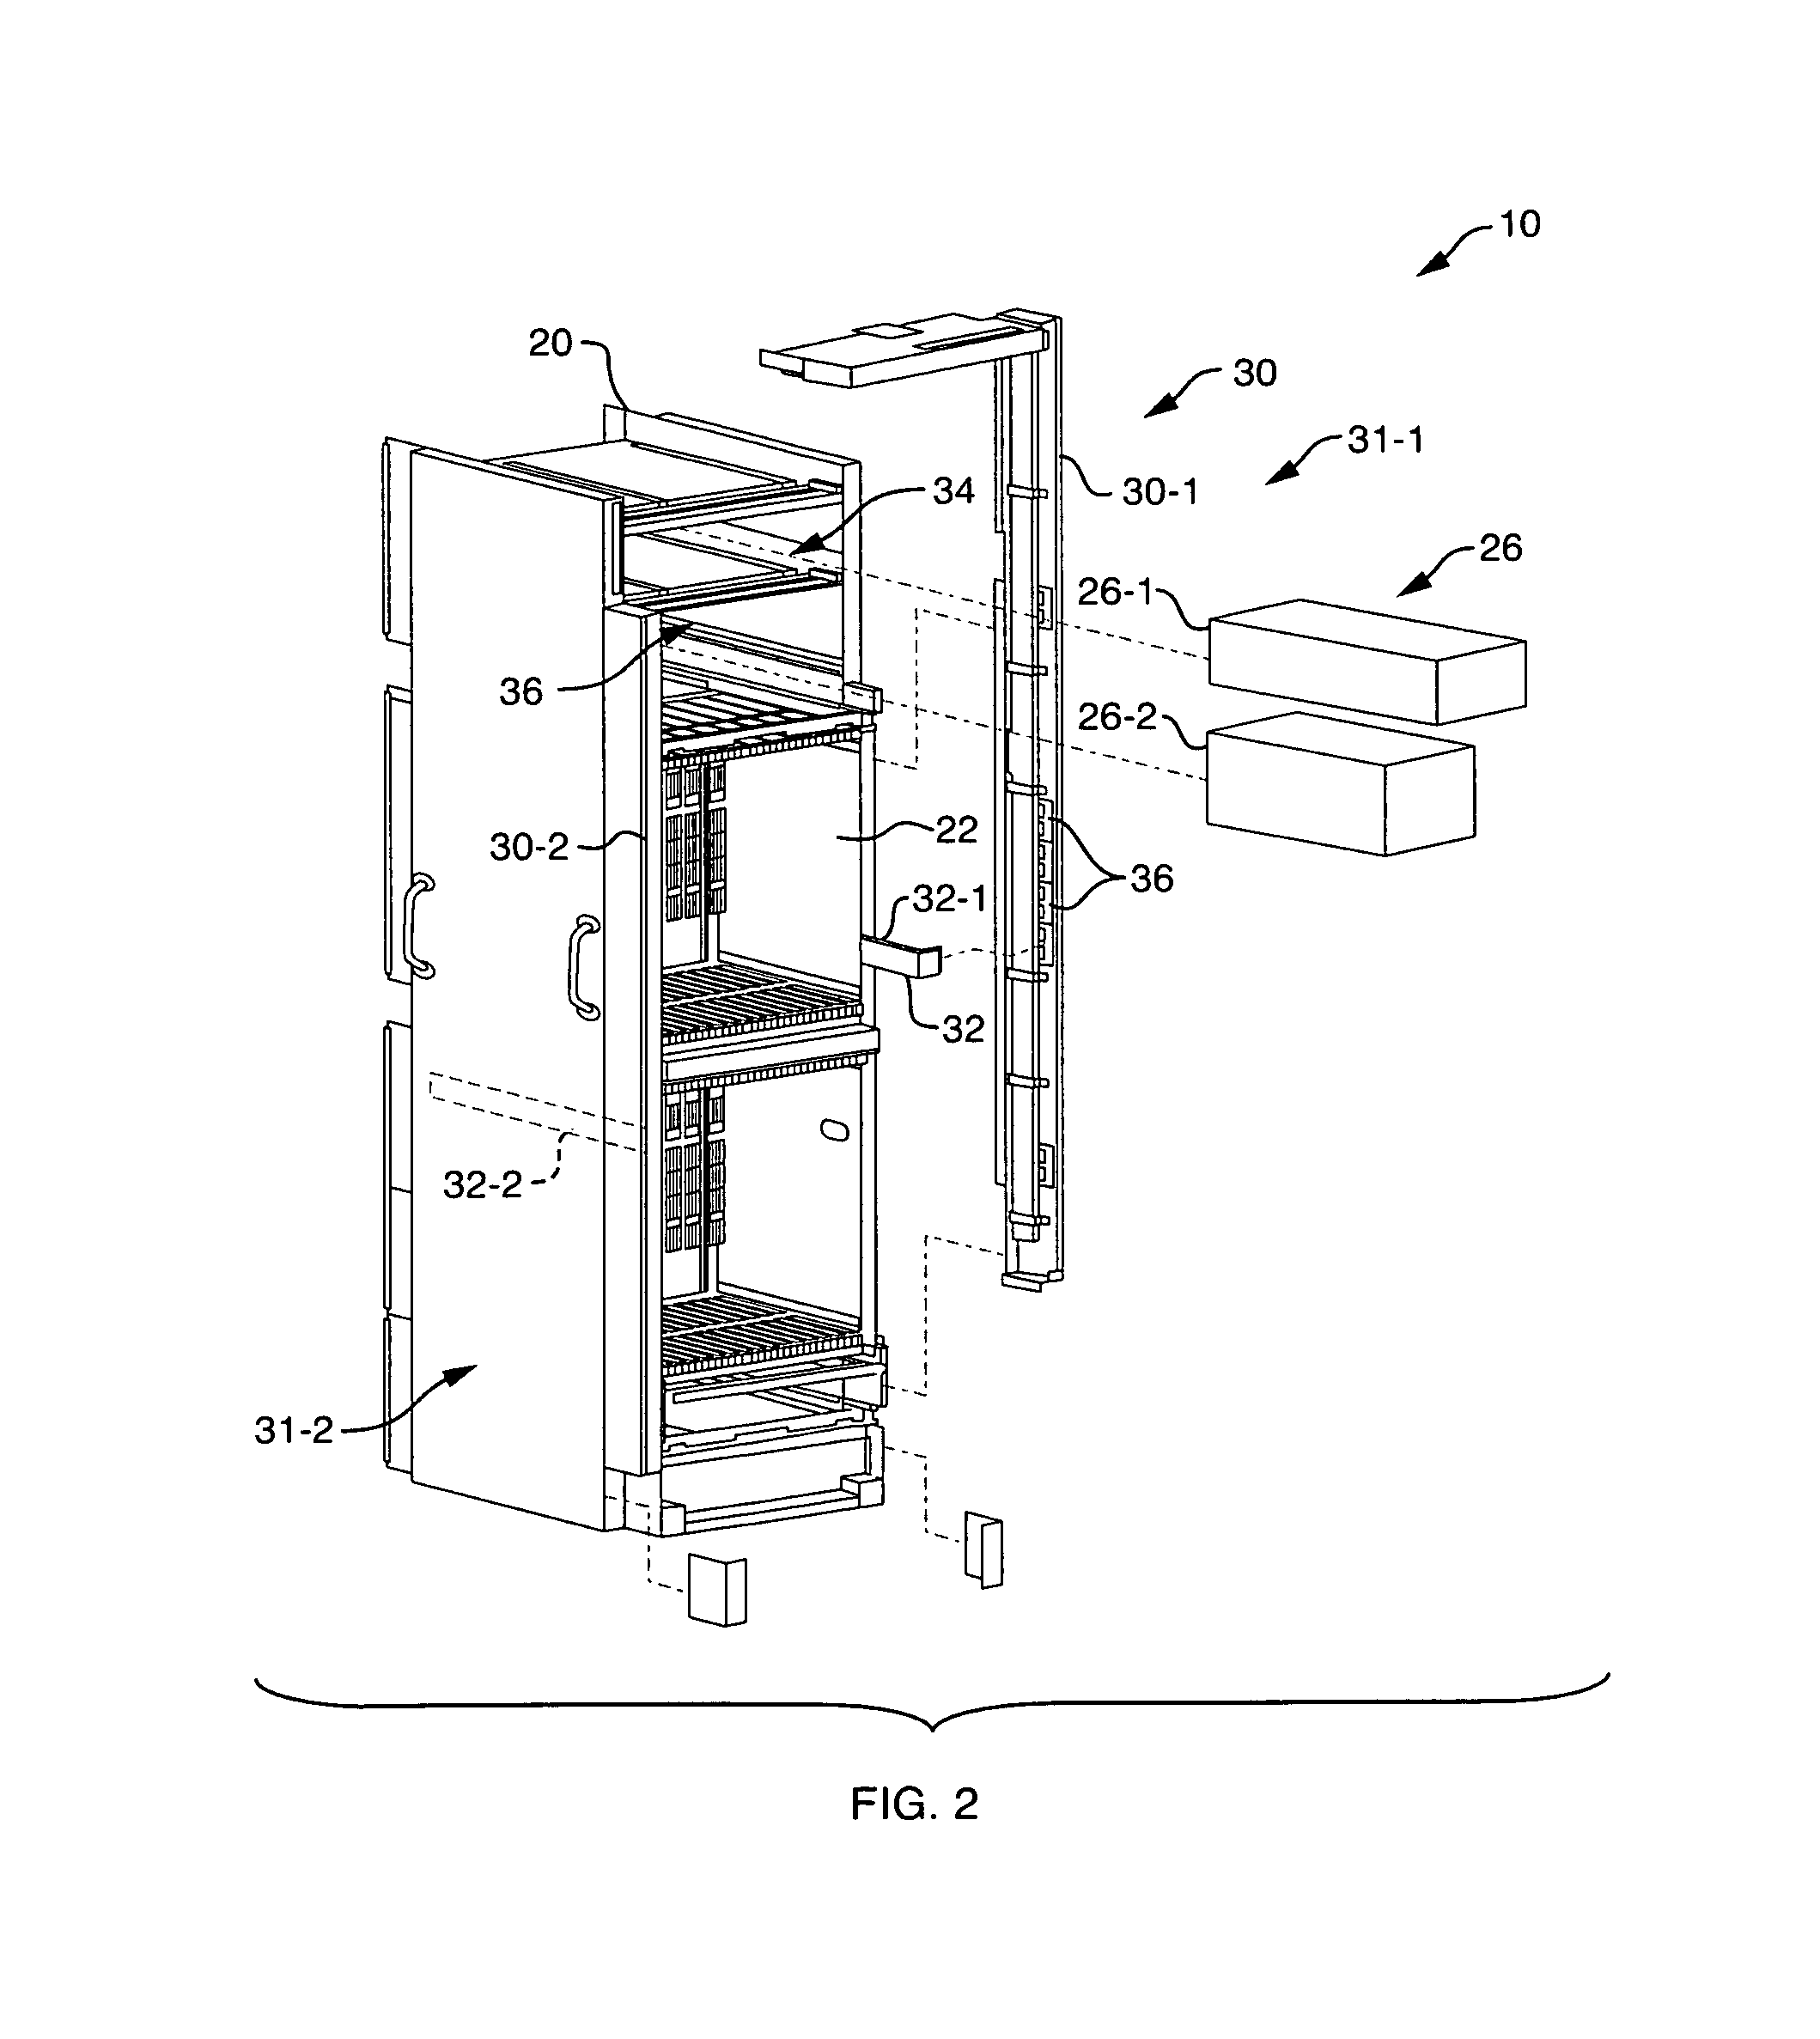 Methods and apparatus for distributing power in a computerized device